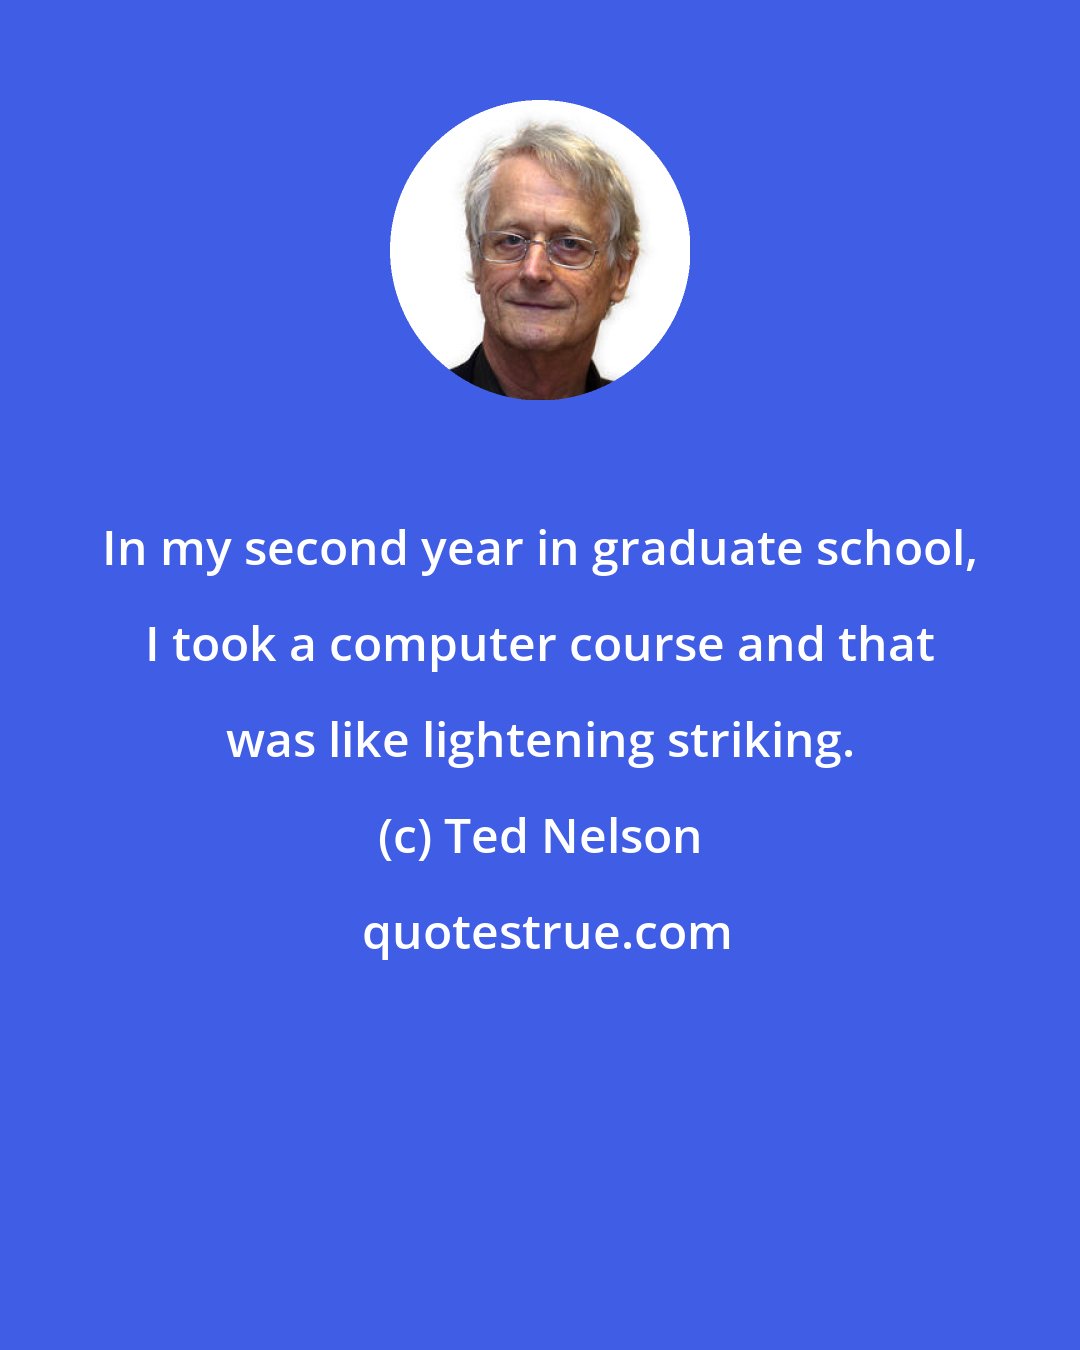 Ted Nelson: In my second year in graduate school, I took a computer course and that was like lightening striking.